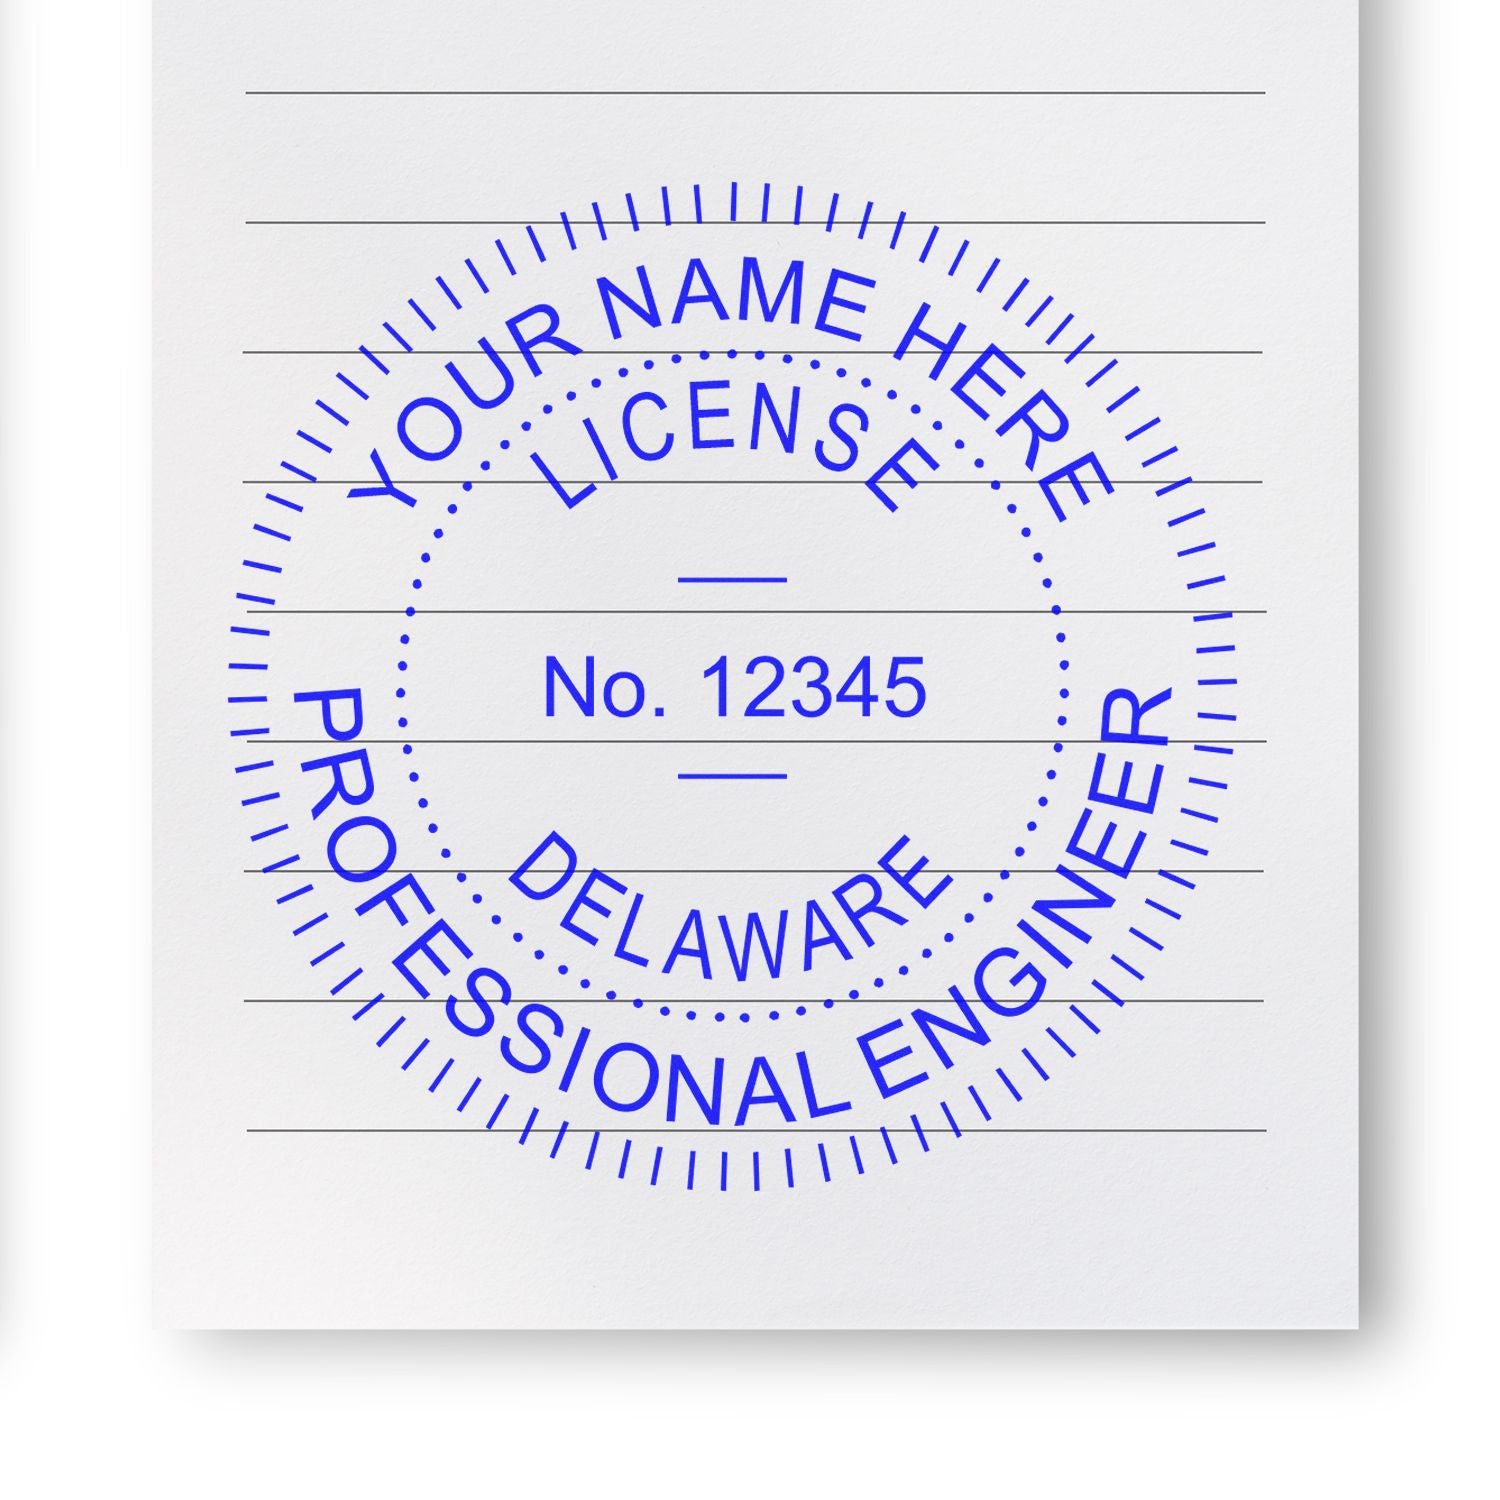 The main image for the Premium MaxLight Pre-Inked Delaware Engineering Stamp depicting a sample of the imprint and electronic files